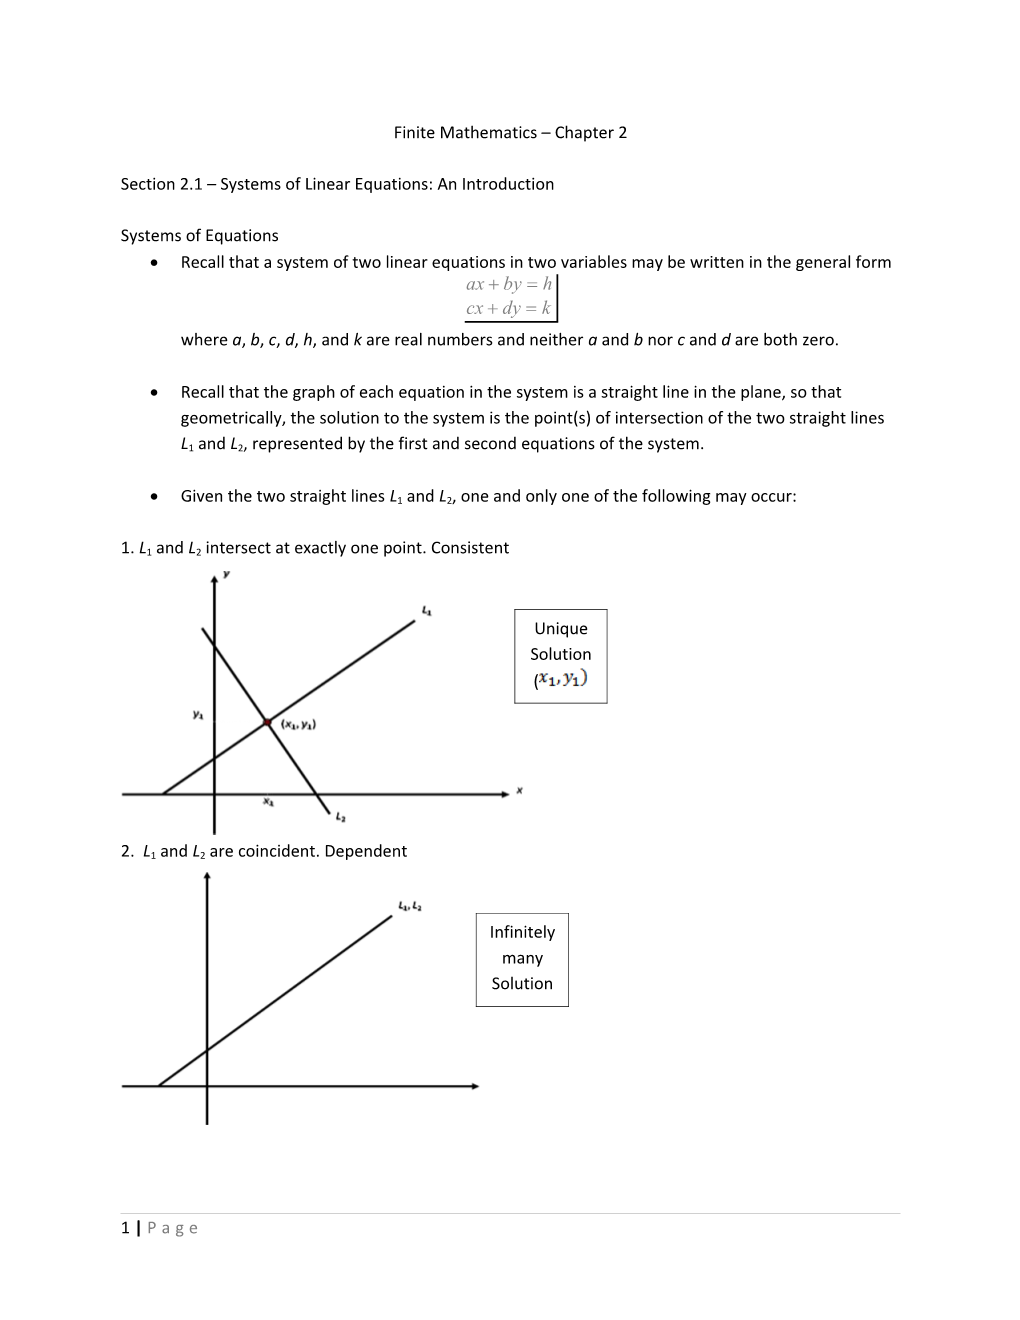 Section 2.1 Systems of Linear Equations: an Introduction